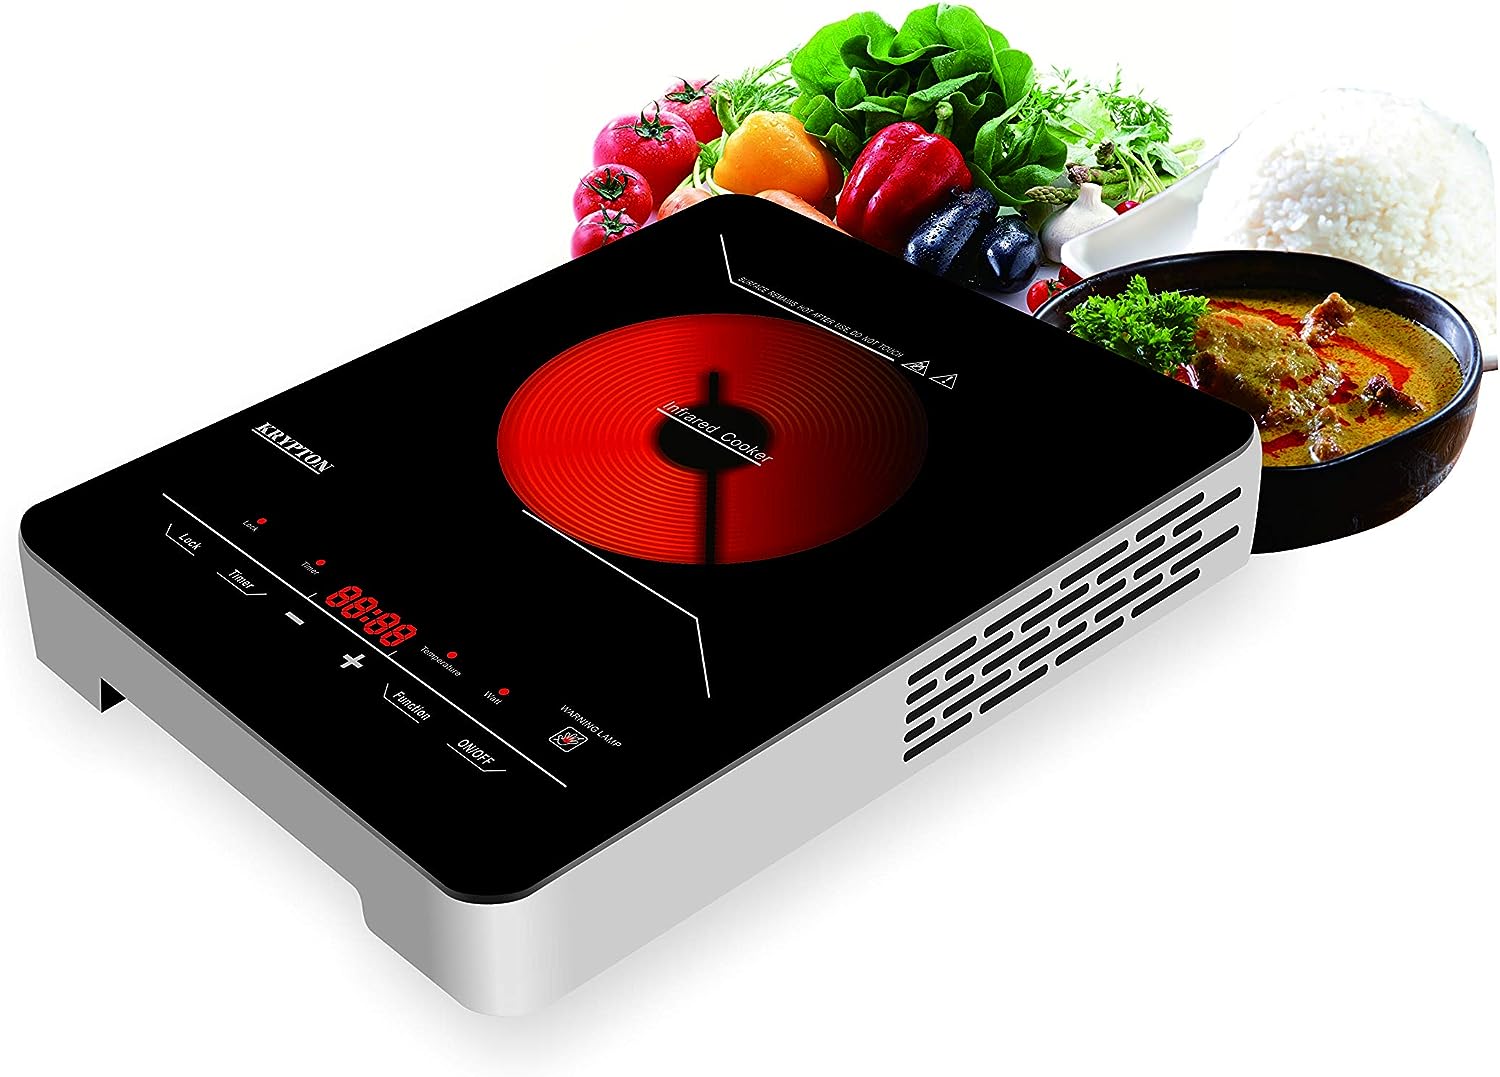 Krypton 2000W Glass Ceramic Infrared Electric Cooker with Digital LED Display, 8 Power Levels, Black and White, KNIC6150